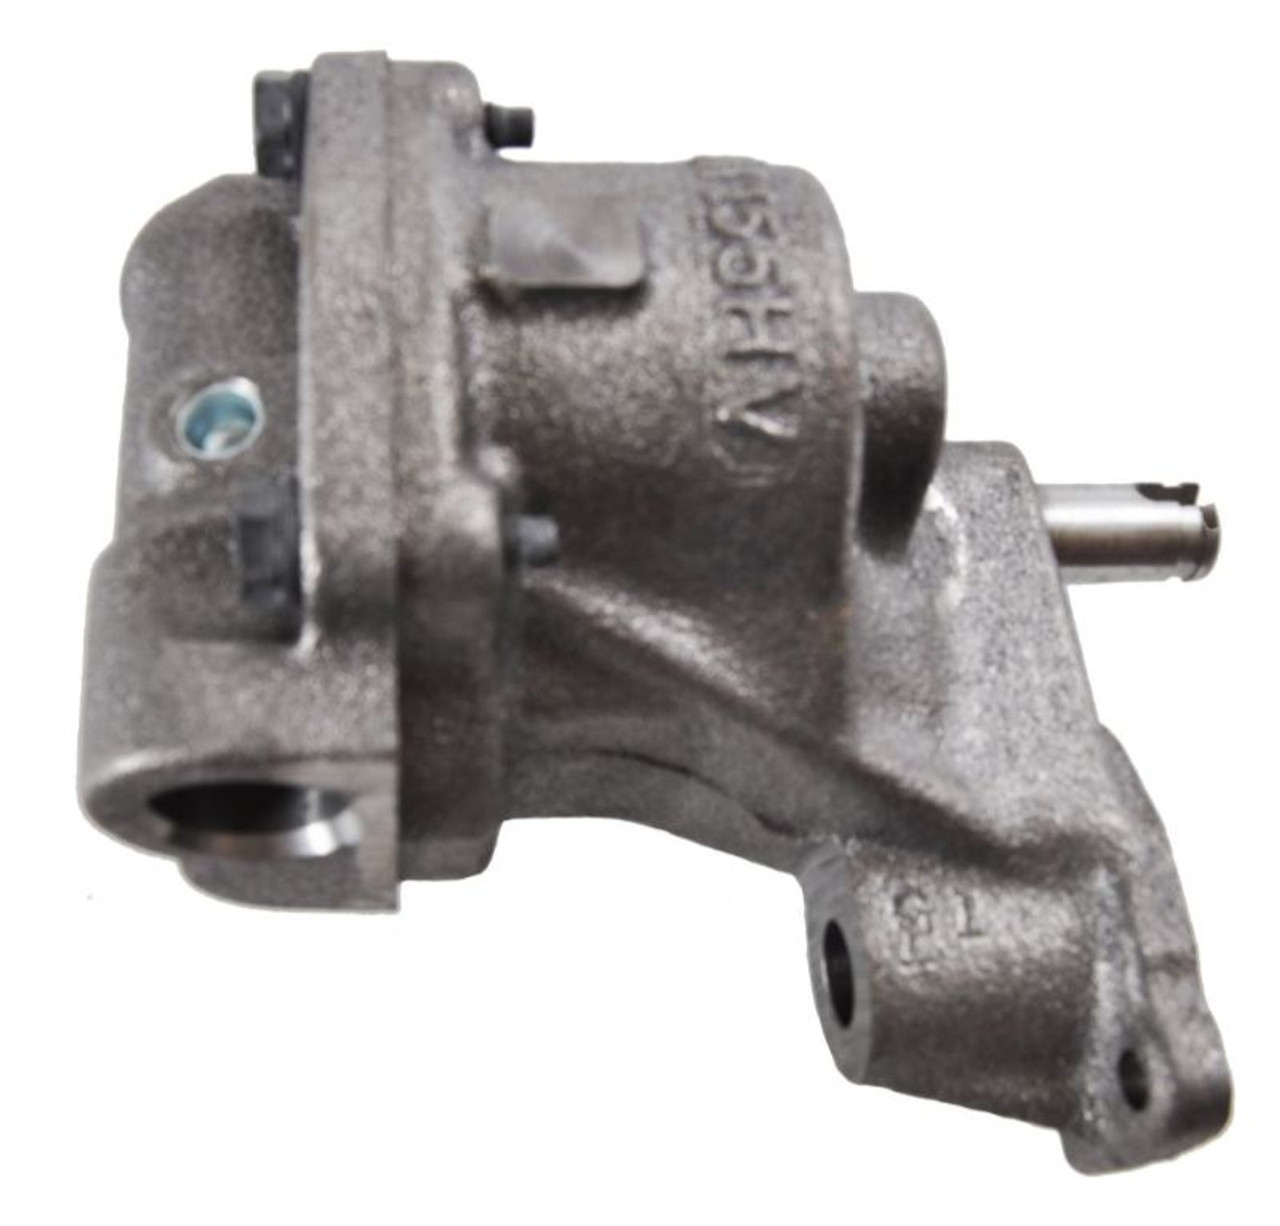 Oil Pump - 1996 Buick Commercial Chassis 5.7L (EP155HV.K249)